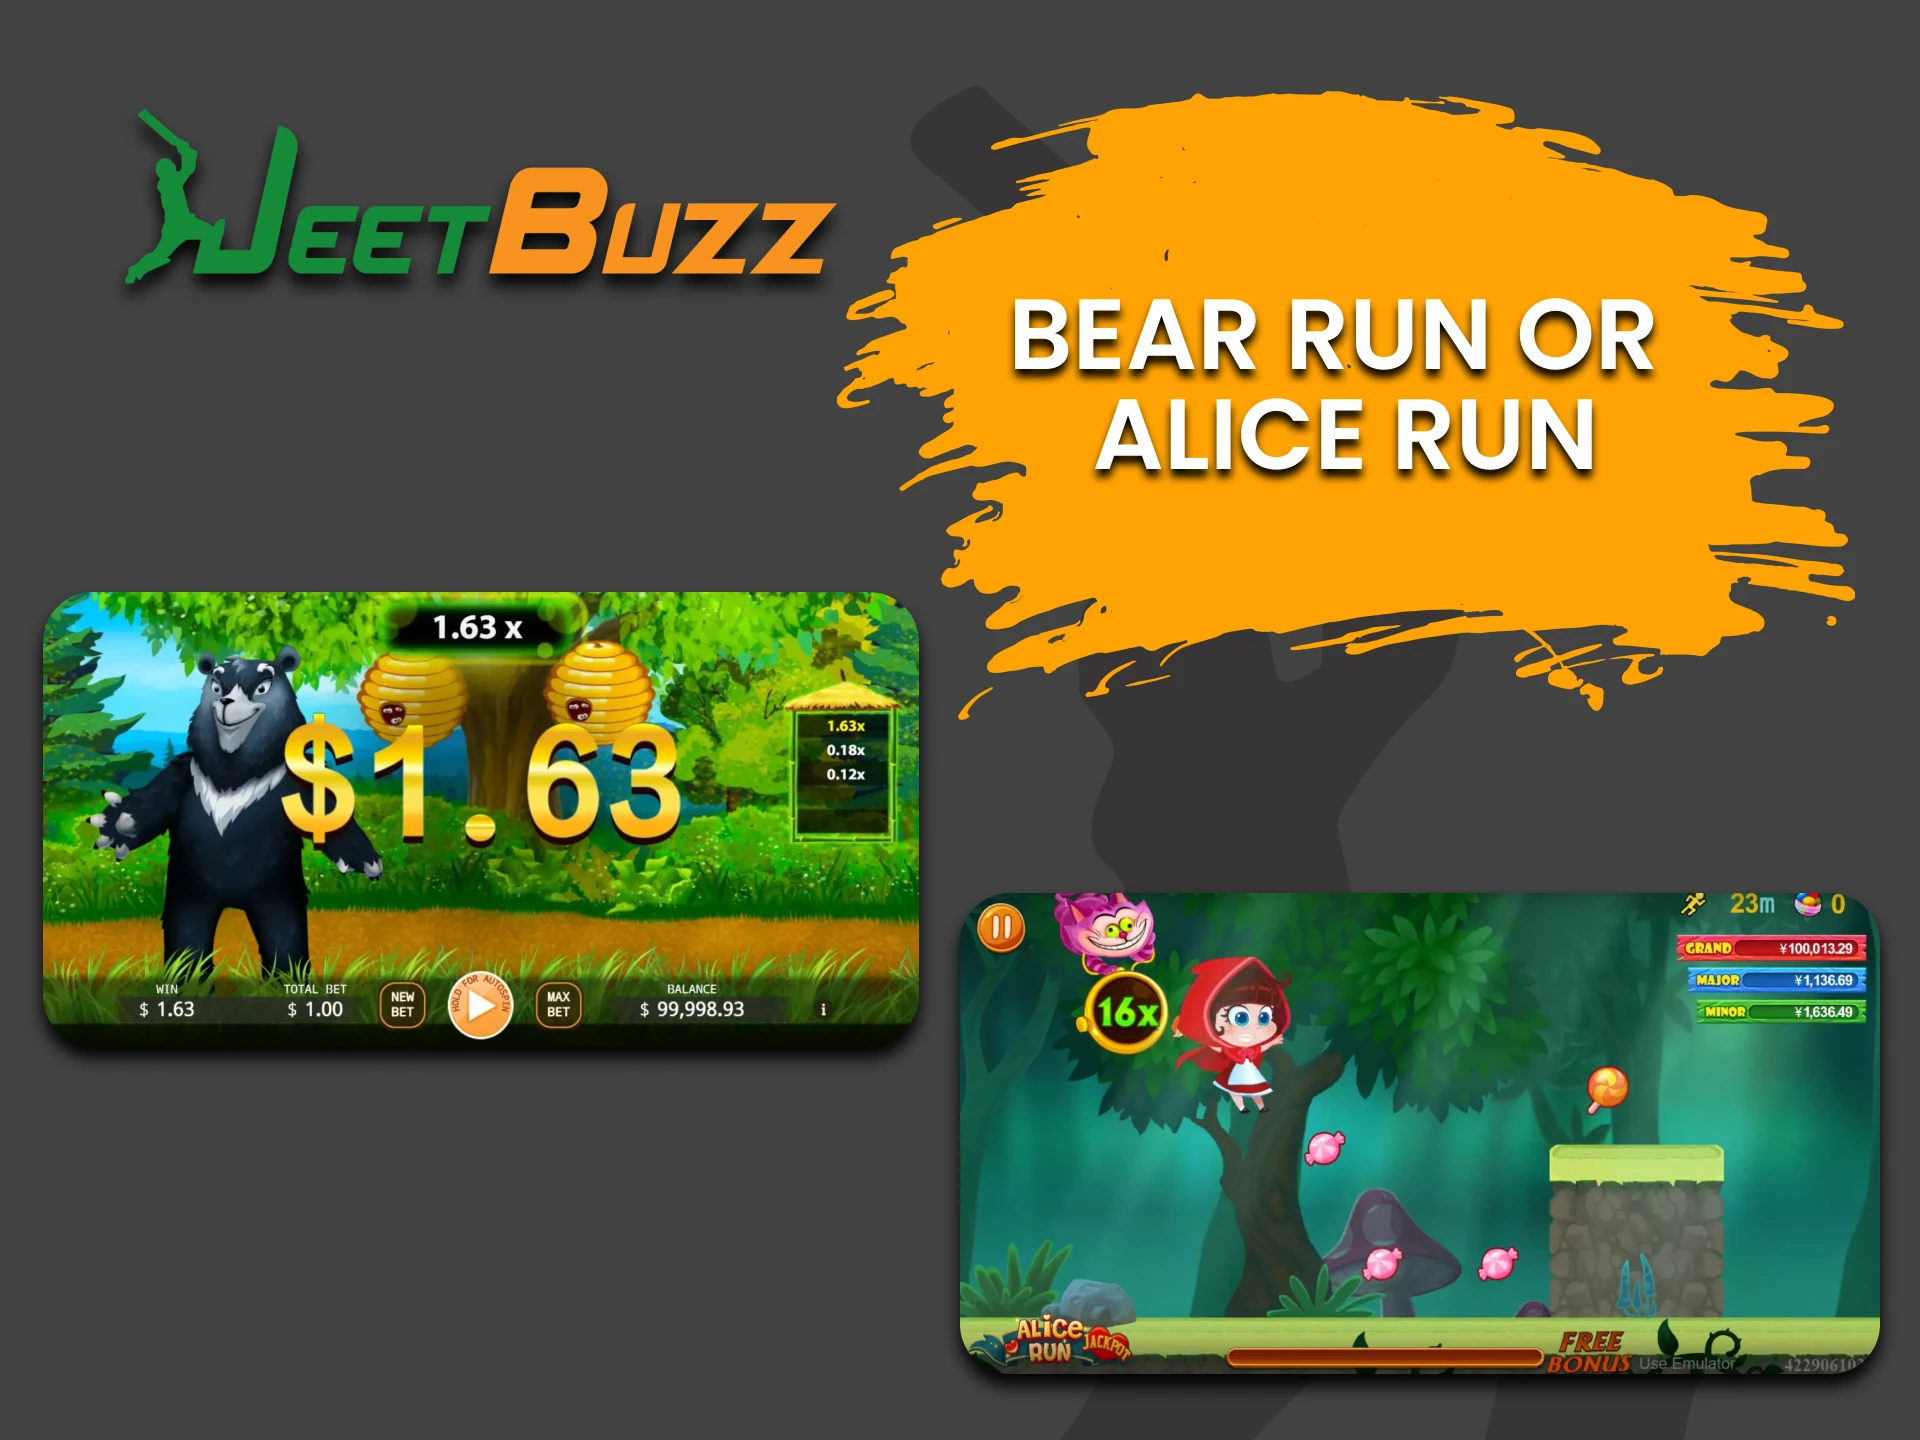 After selecting the Arcade section of JeetBuzz, try playing Bear Run or Alice Run.